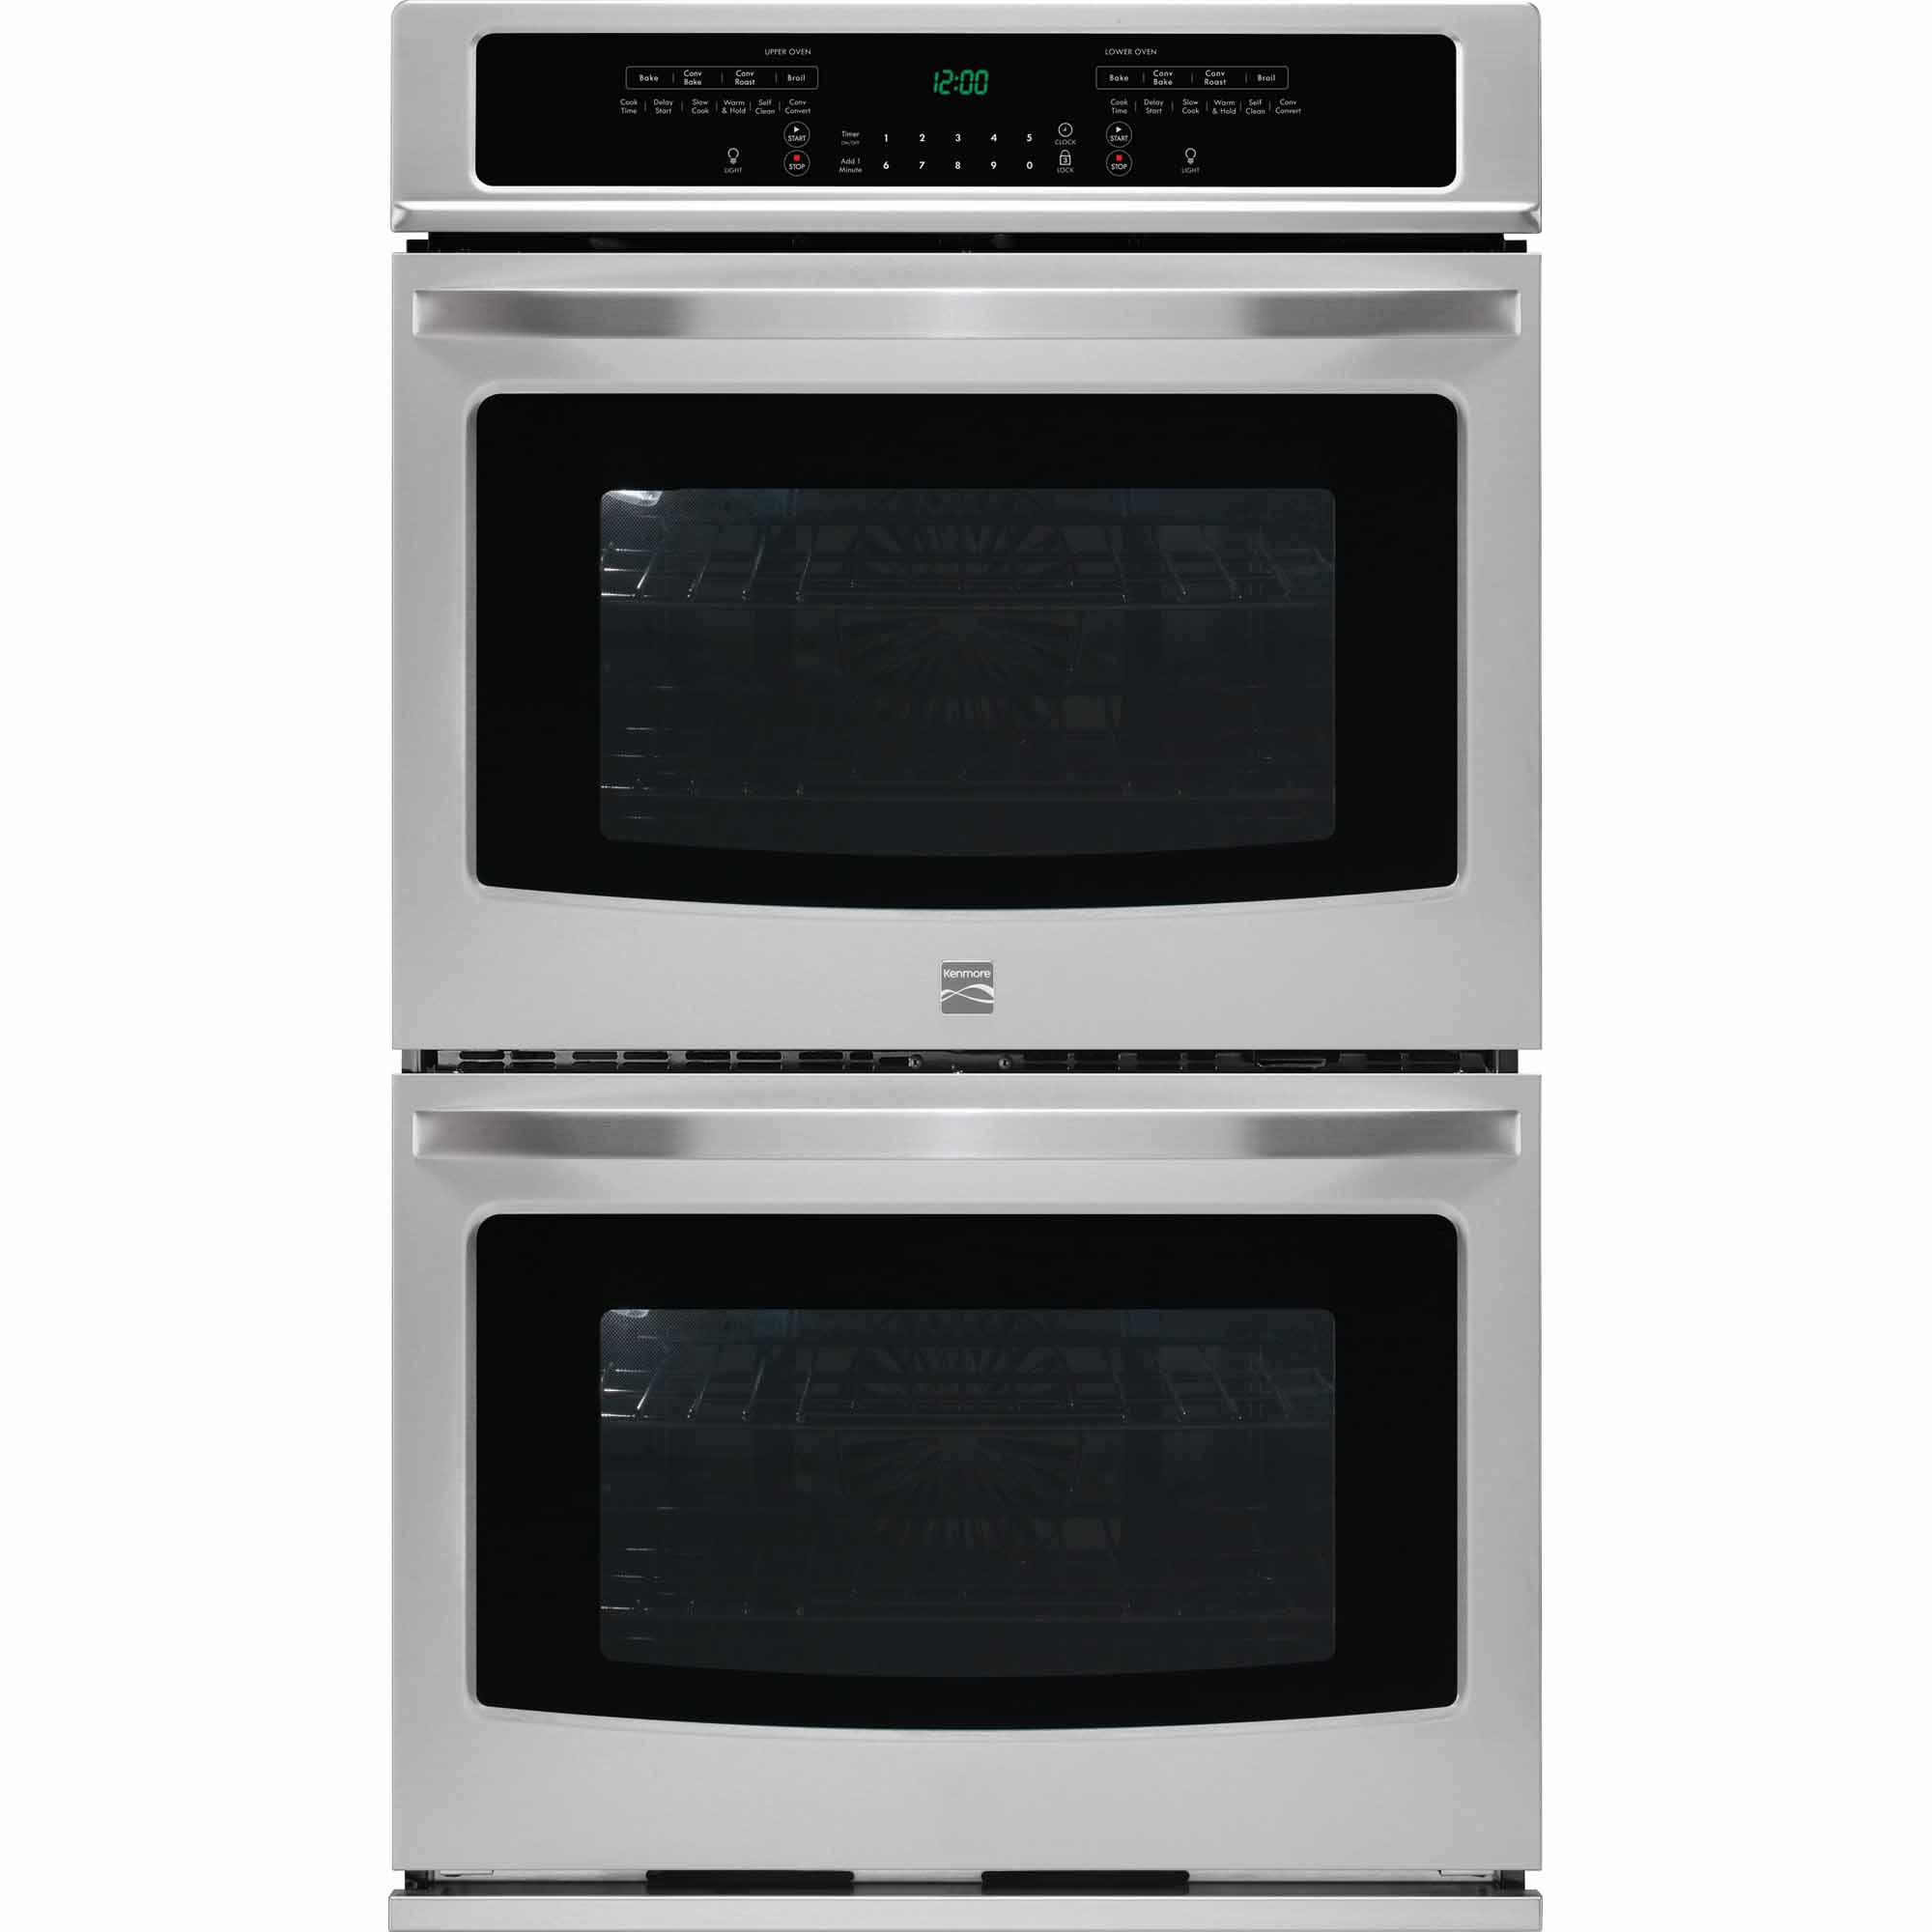 0012505800207 - 49533 30 SELF-CLEAN DOUBLE ELECTRIC WALL OVEN W/ CONVECTION - STAINLESS STEEL